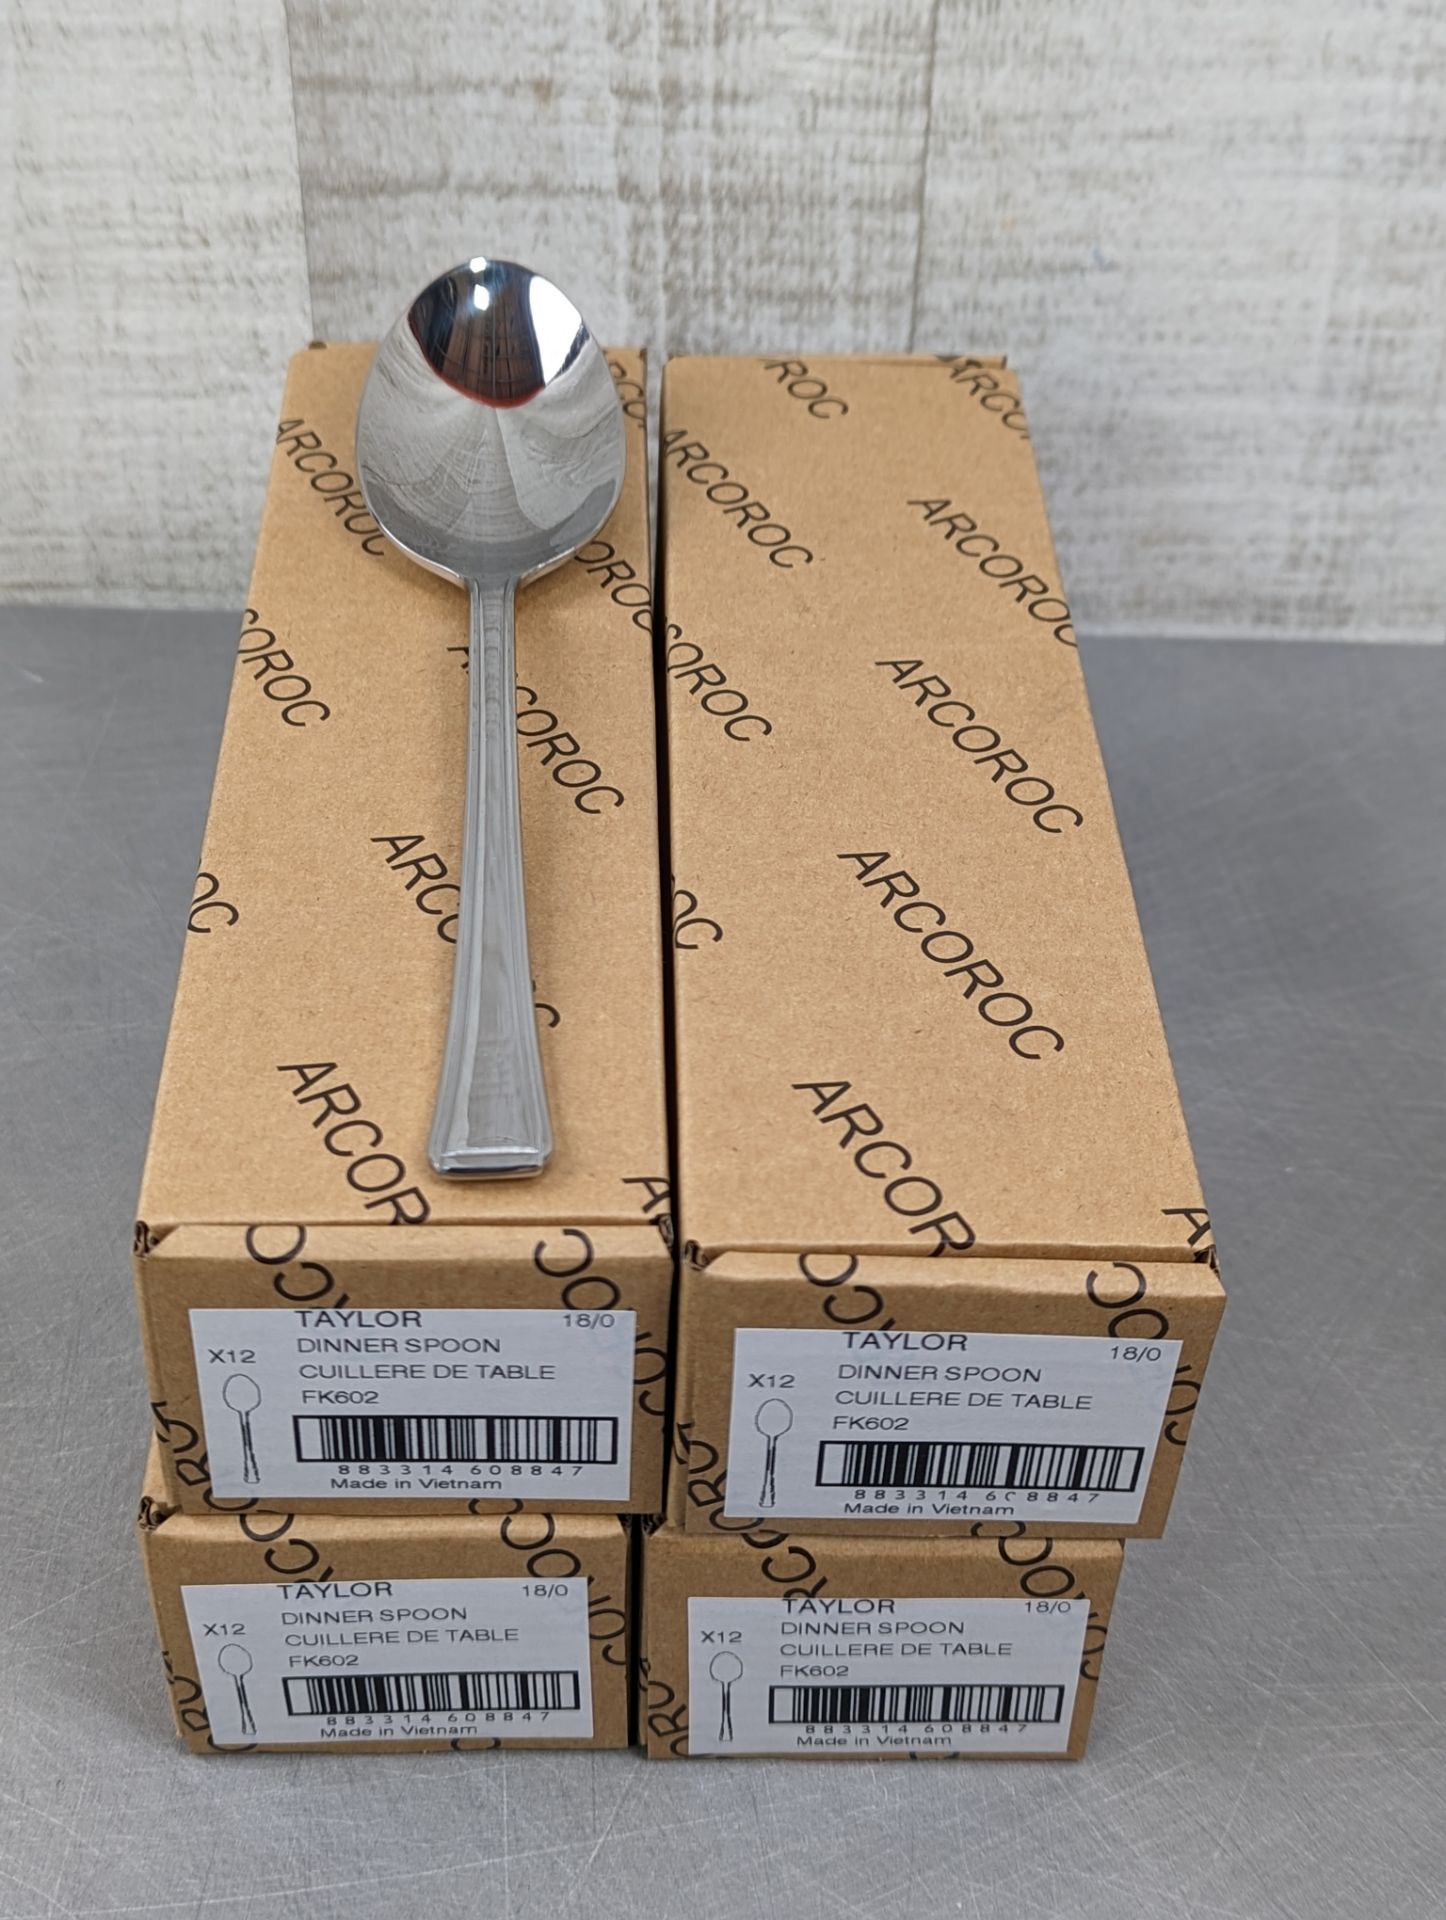 TAYLOR DINNER SPOONS, ARCOROC FK602 - LOT OF 48 - Image 2 of 3